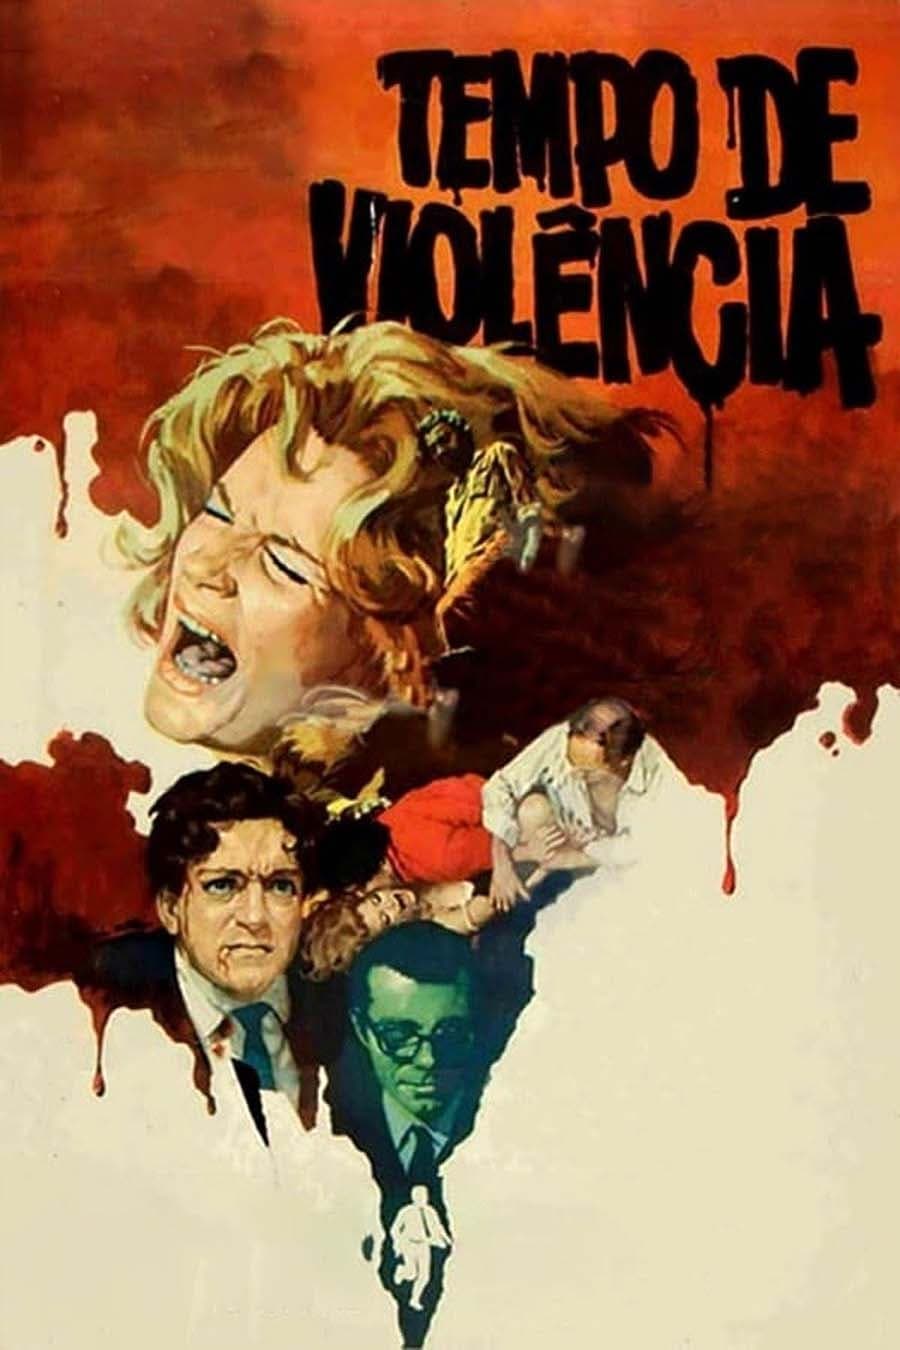 Time of Violence (1969)